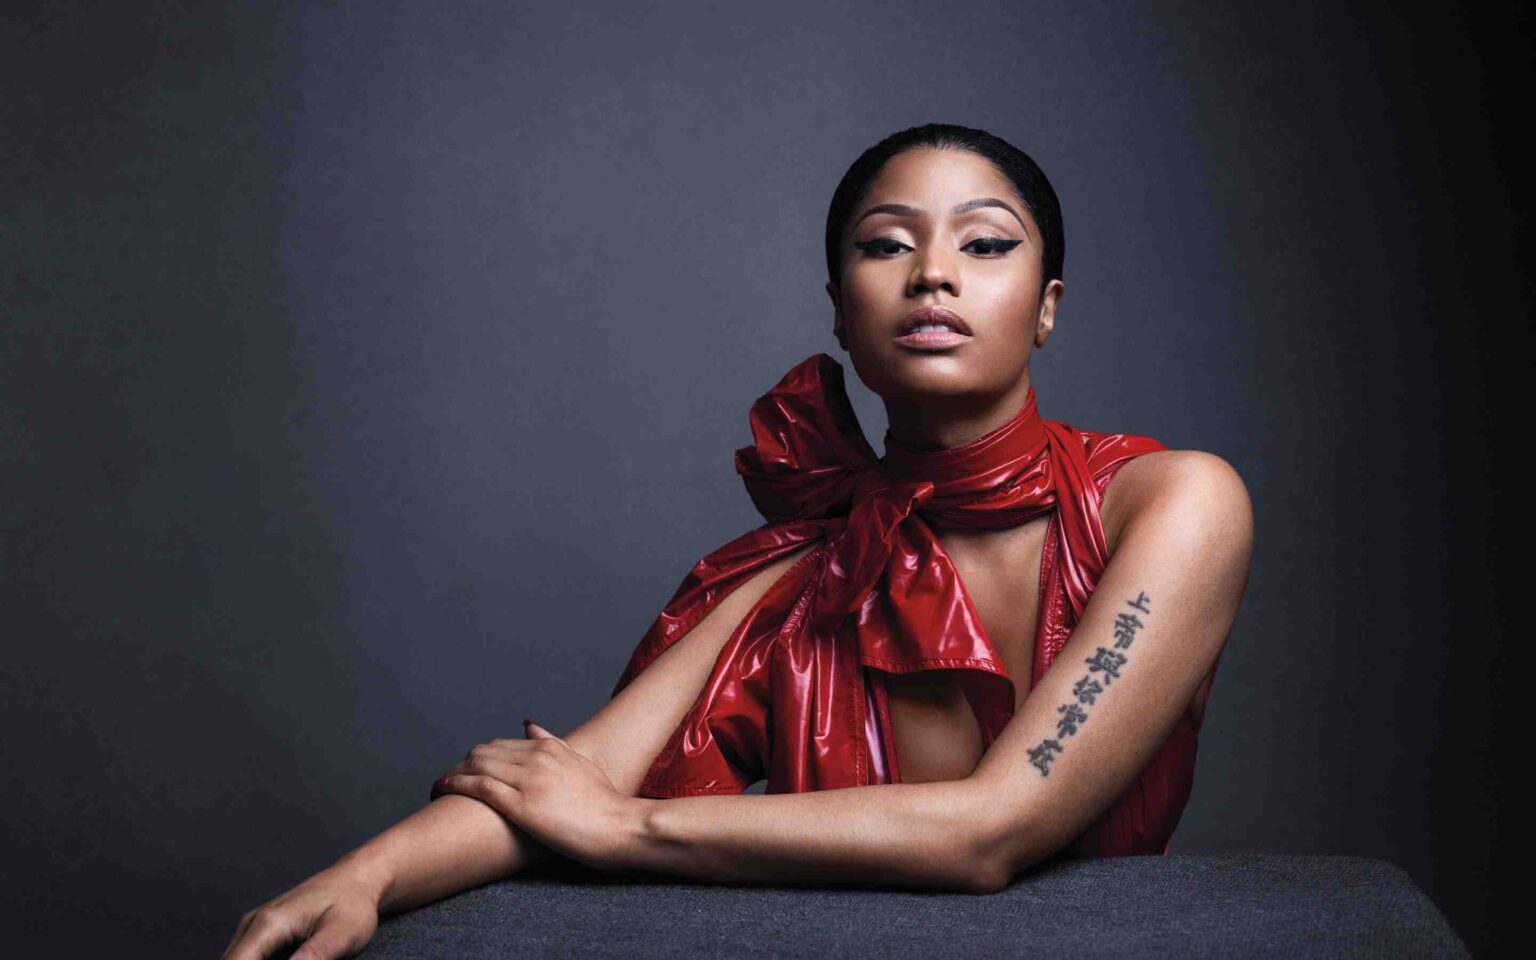 Pop some popcorn and dive into the lavish labyrinth of Nicki Minaj's net worth. Did her beef with Megan Thee Stallion serve a slap to her stack or fuel her fame? Find out here!